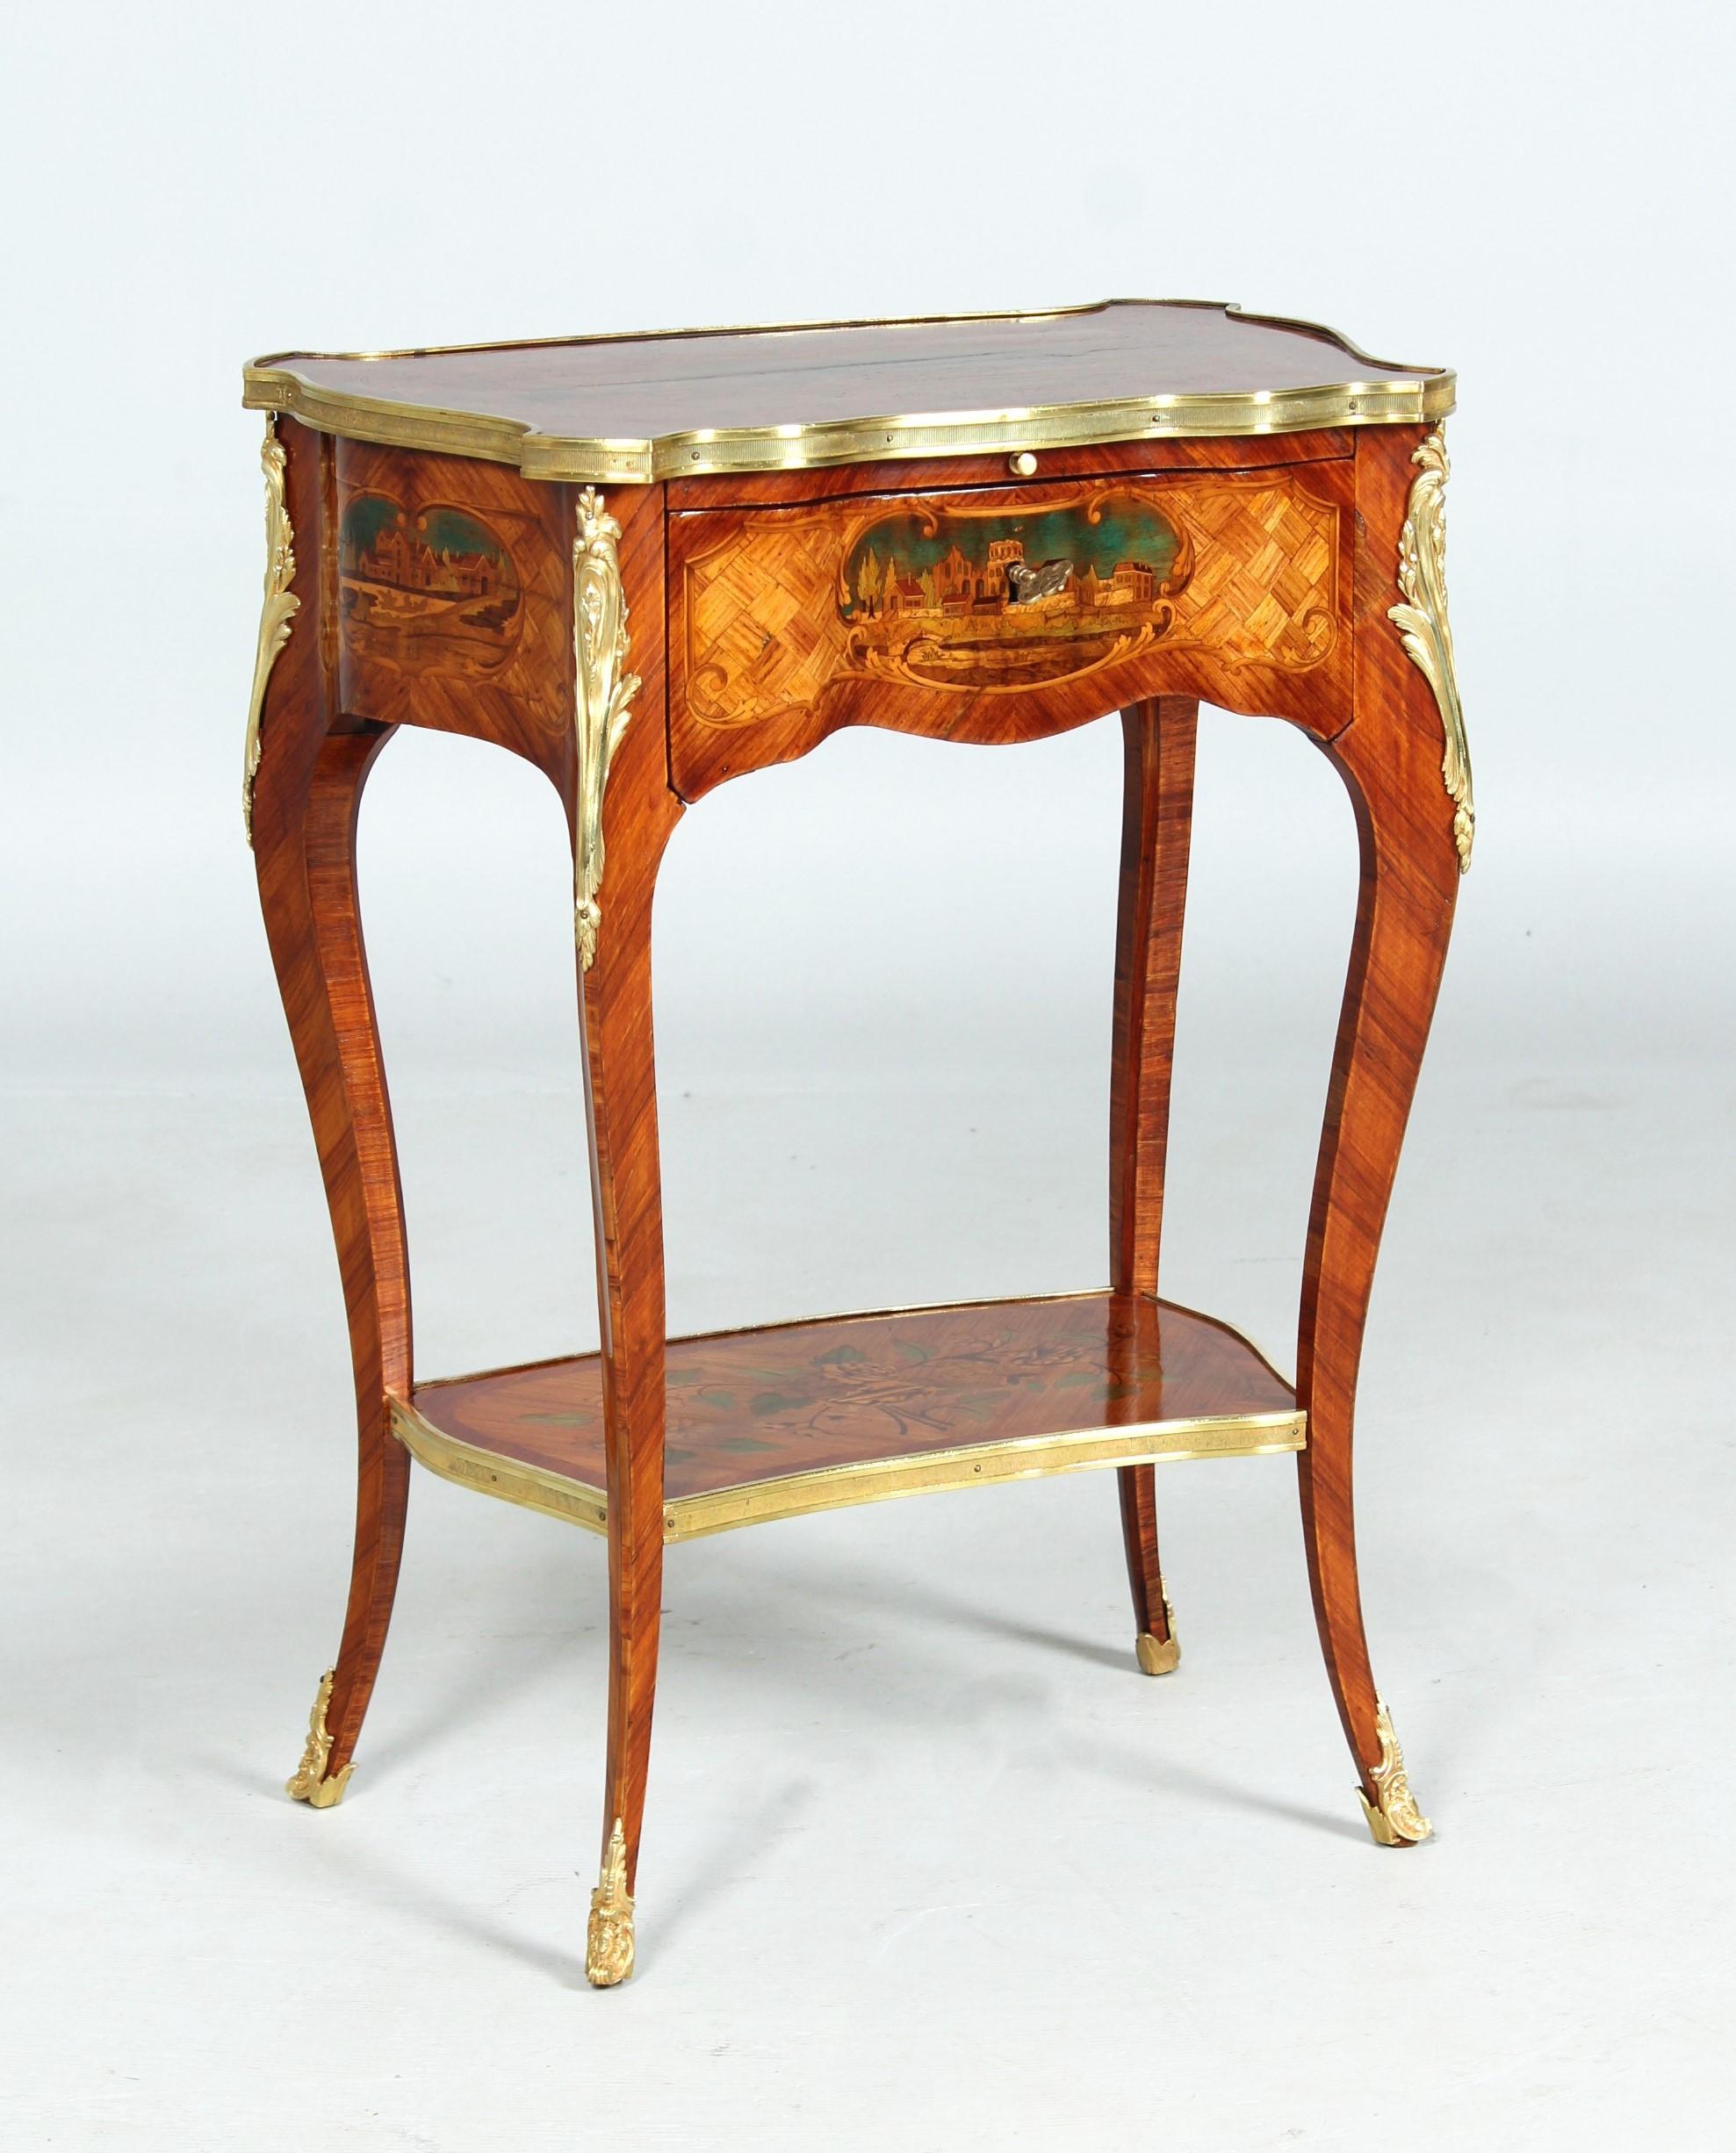  Ladies Desk with Fine Marquetry, Attributed to Beurdeley, Paris, circa 1880 For Sale 10